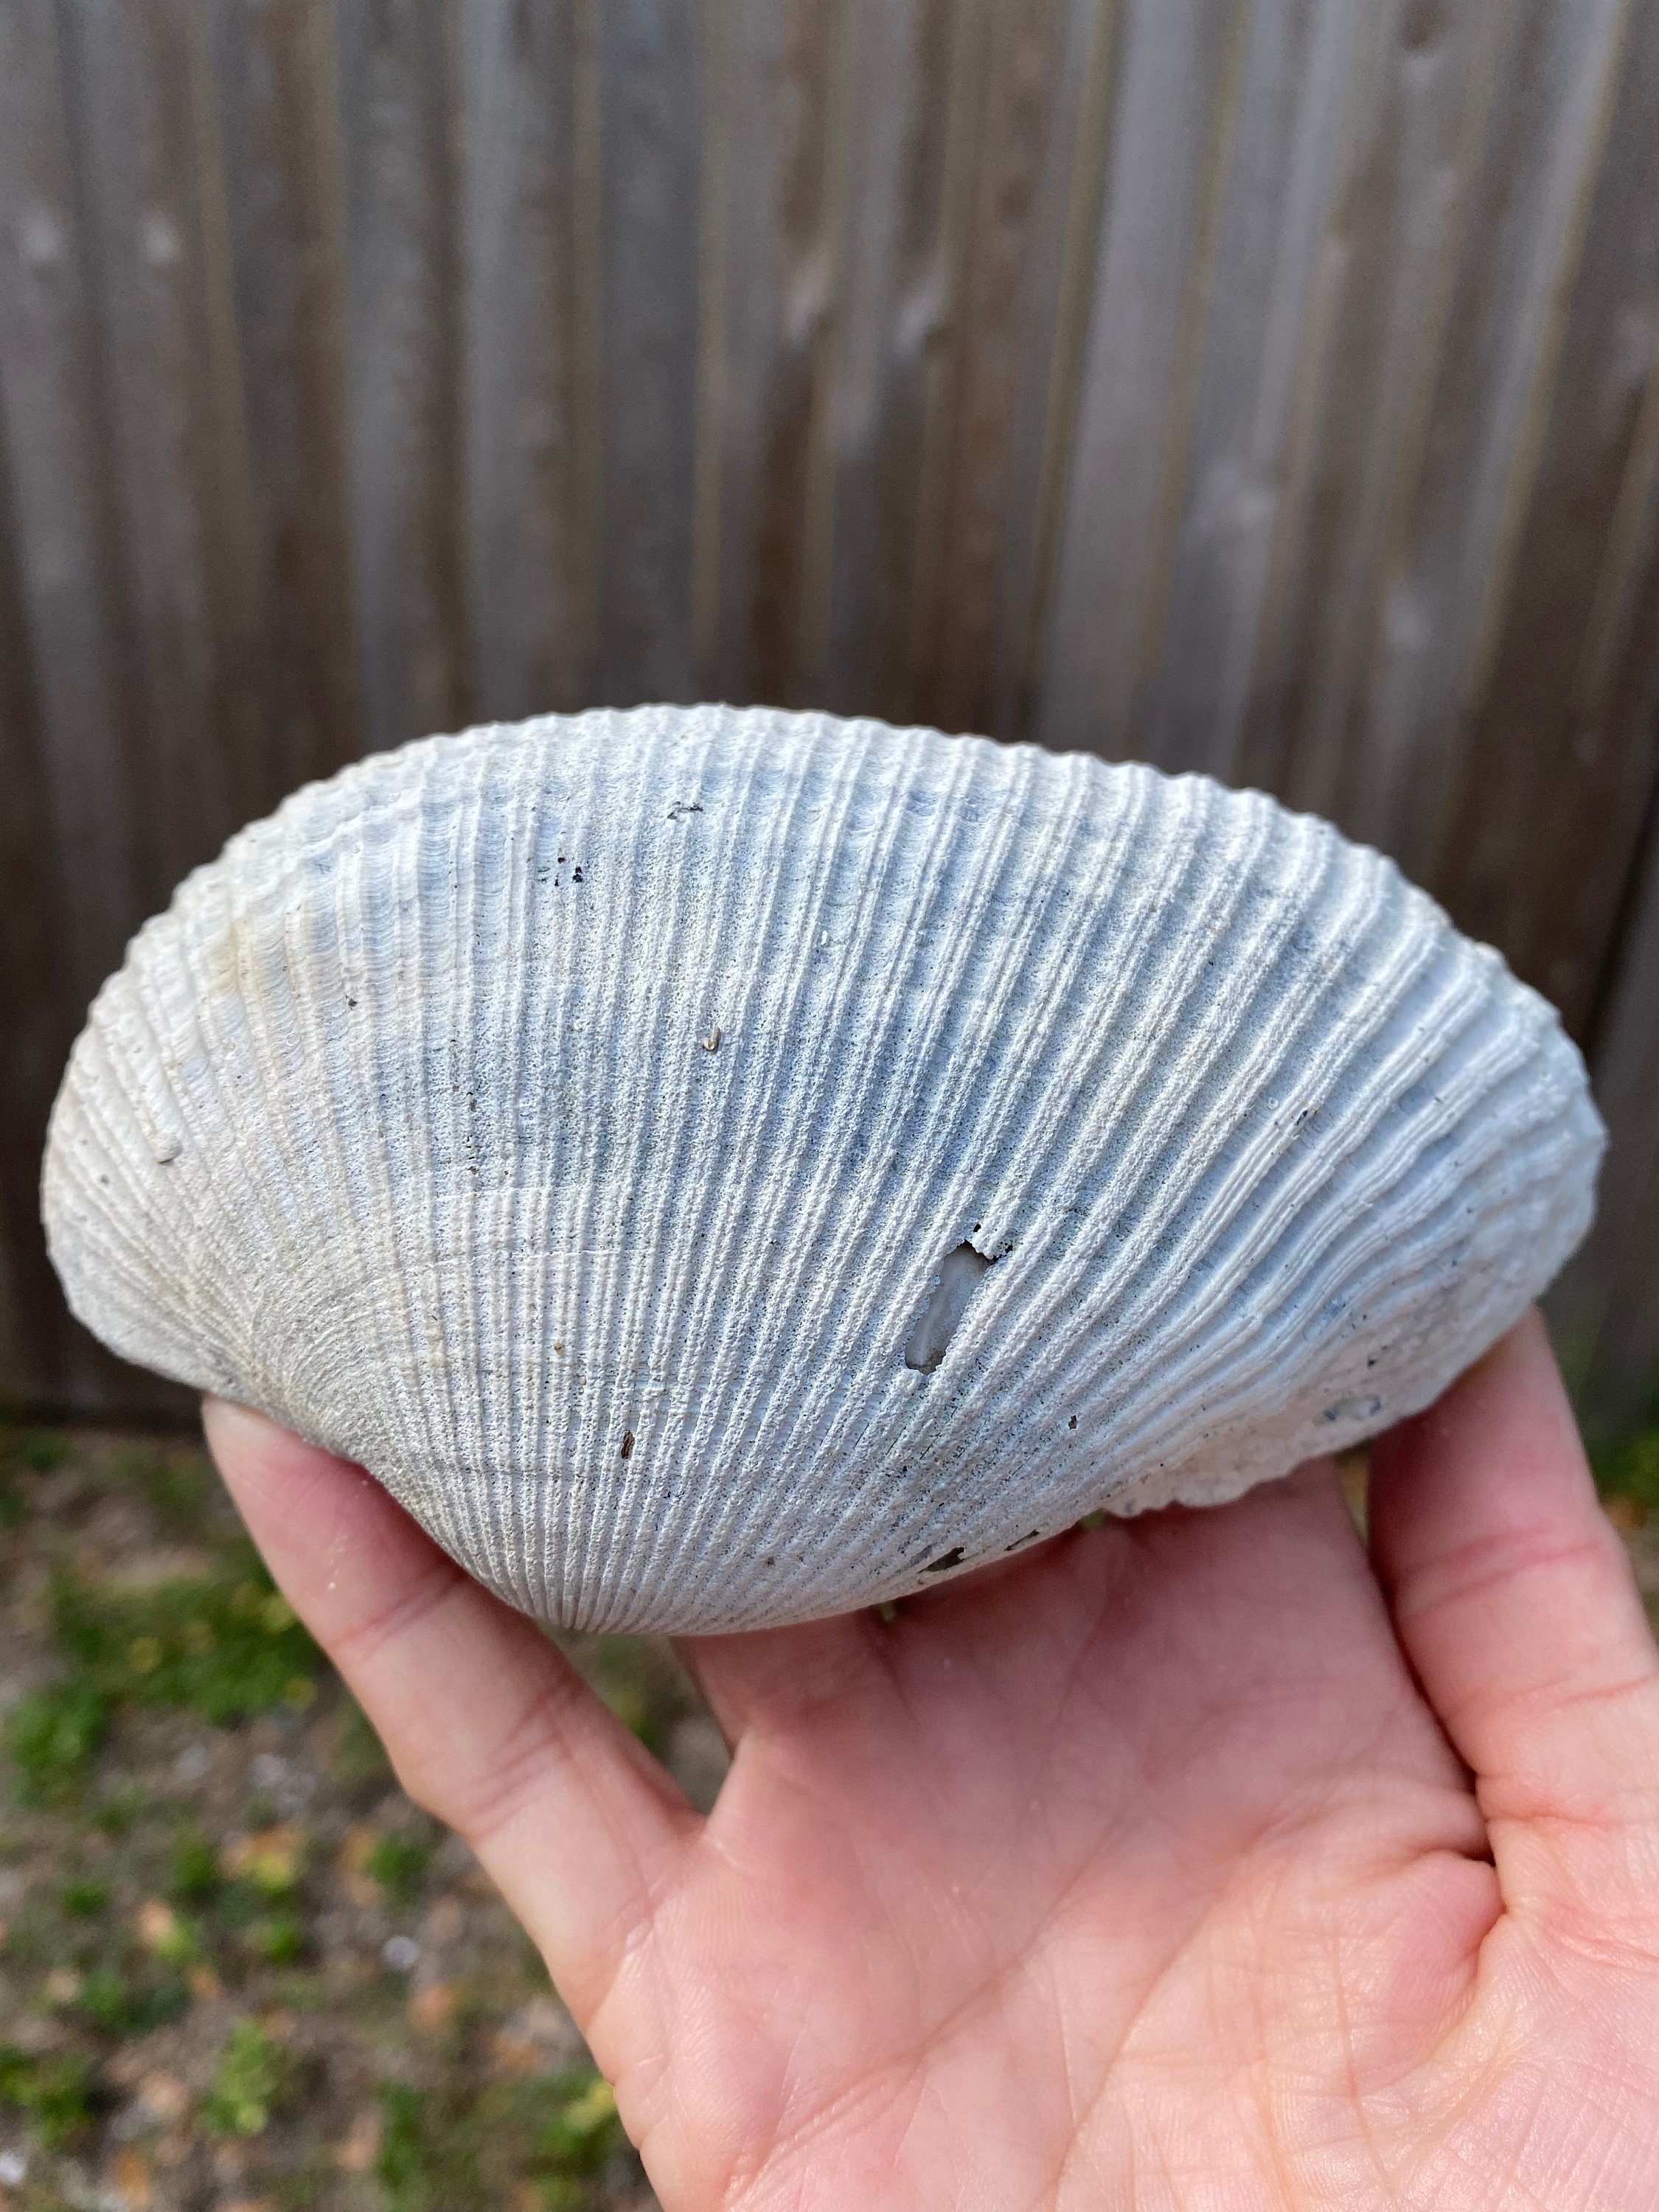 Large Ark Clam Fossil From Florida - Etsy